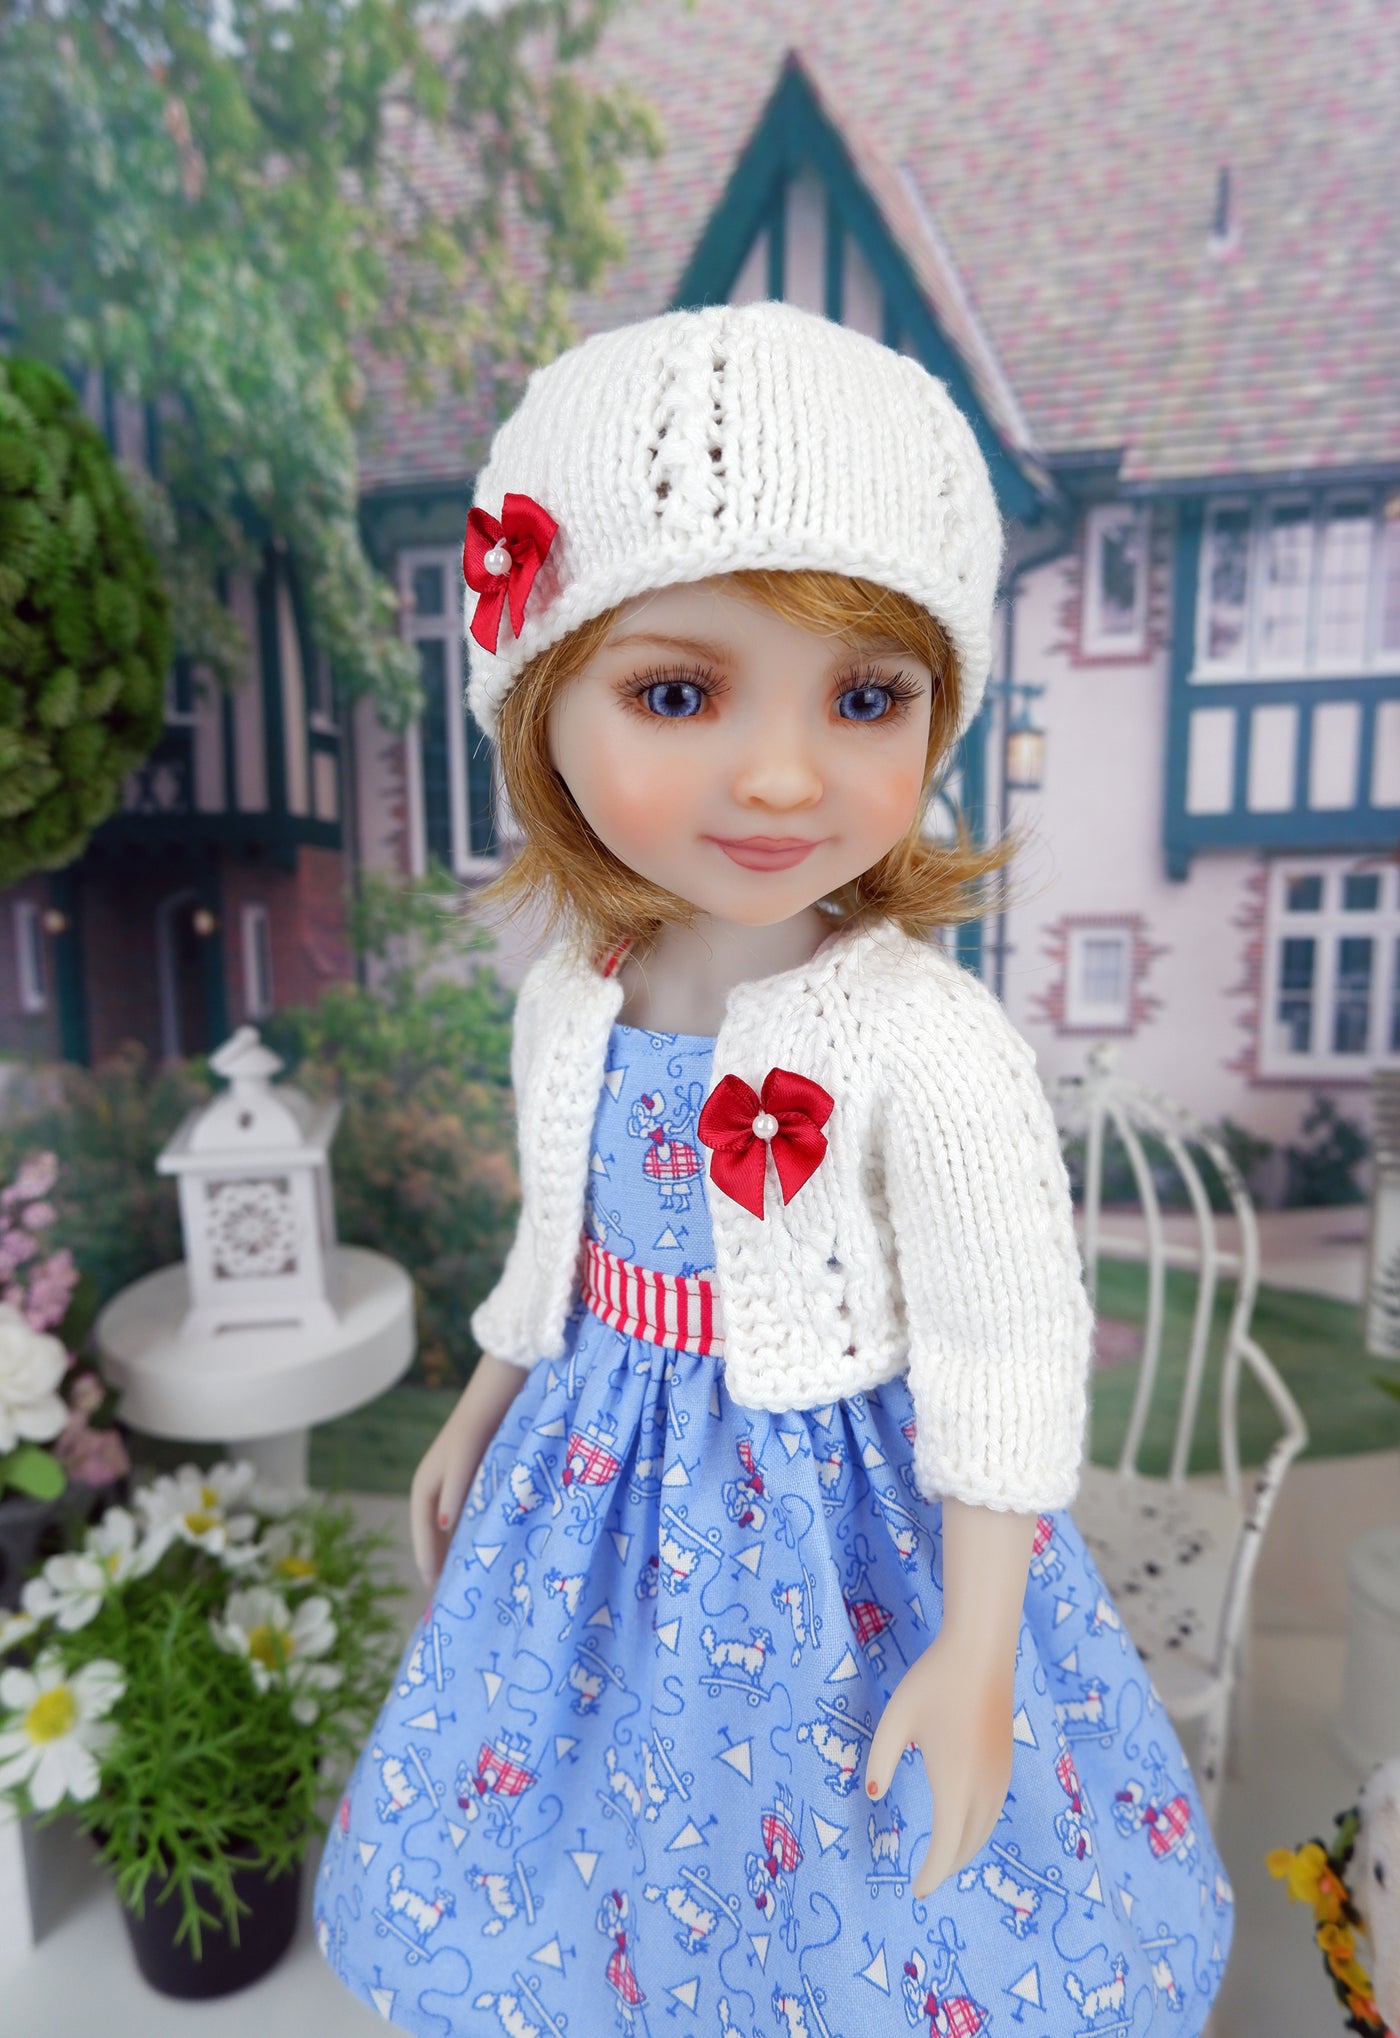 Bo Peep - dress and sweater set with shoes for Ruby Red Fashion Friends doll